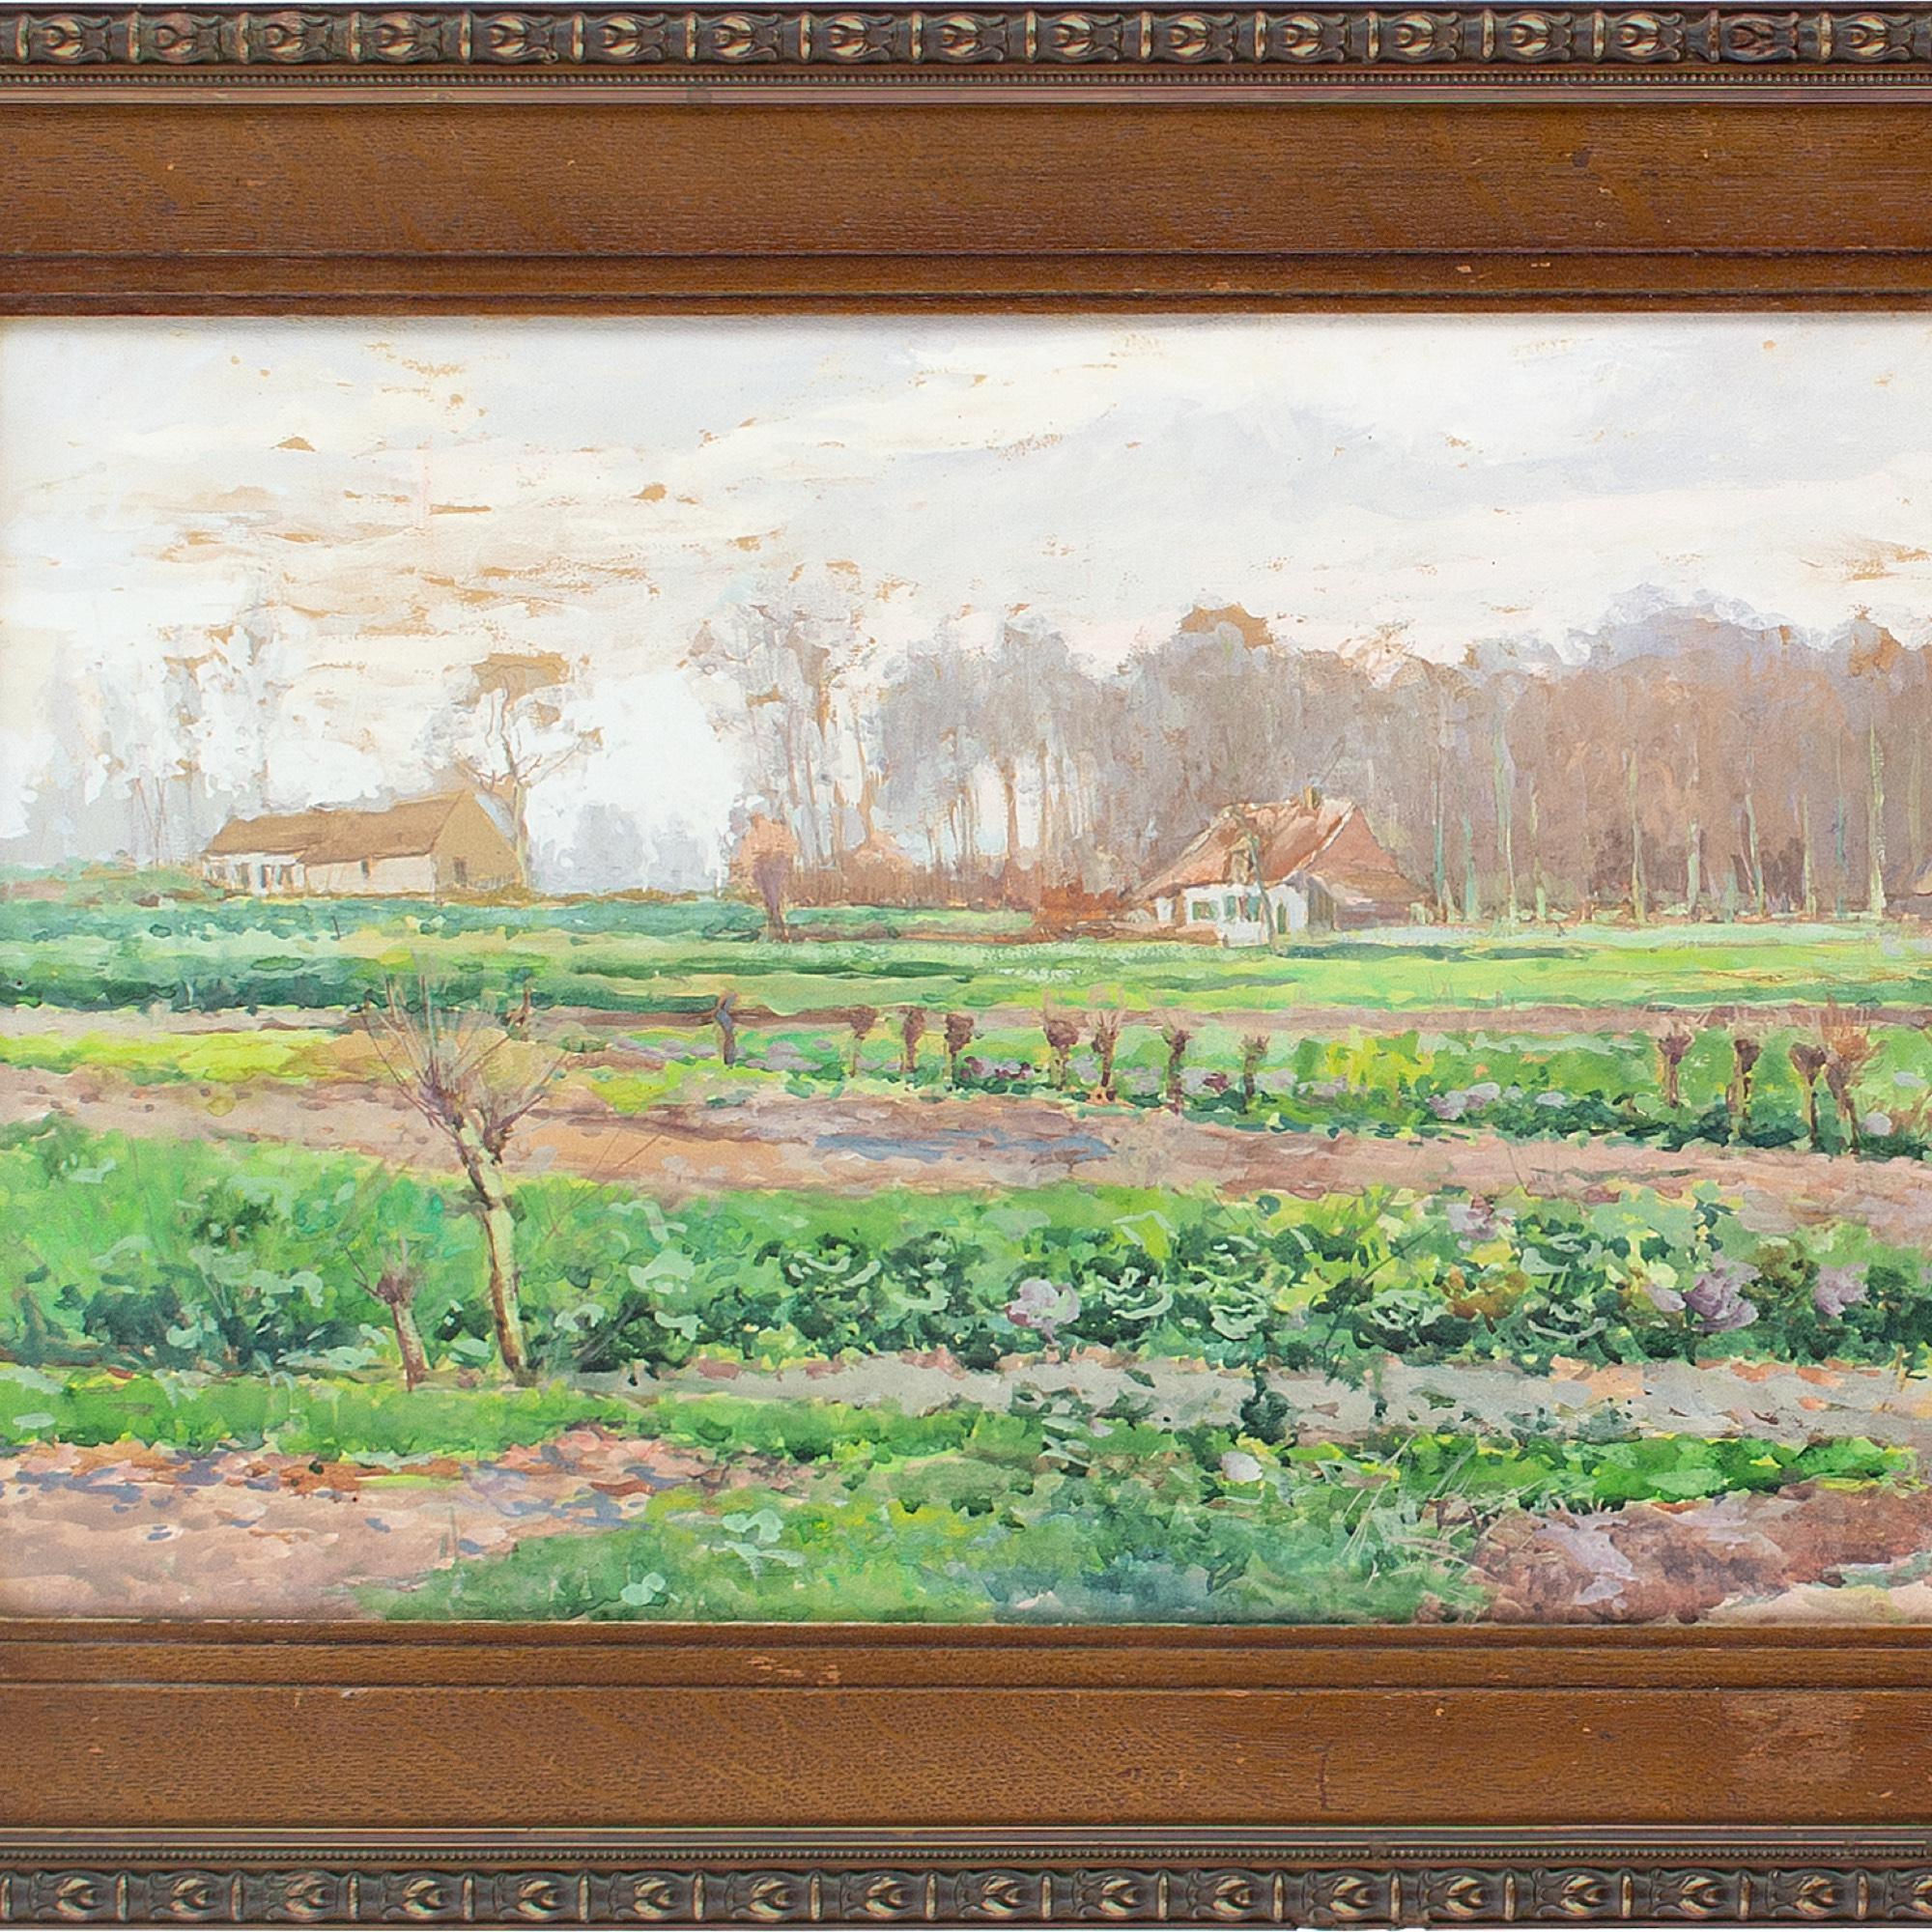 This early 20th-century watercolour by Belgian artist Victor Wagemaekers (1876-1953) depicts a view across an open field towards several cottages. It’s an accomplished naturalistic work.

Here we see the characteristically flat farmland of the low